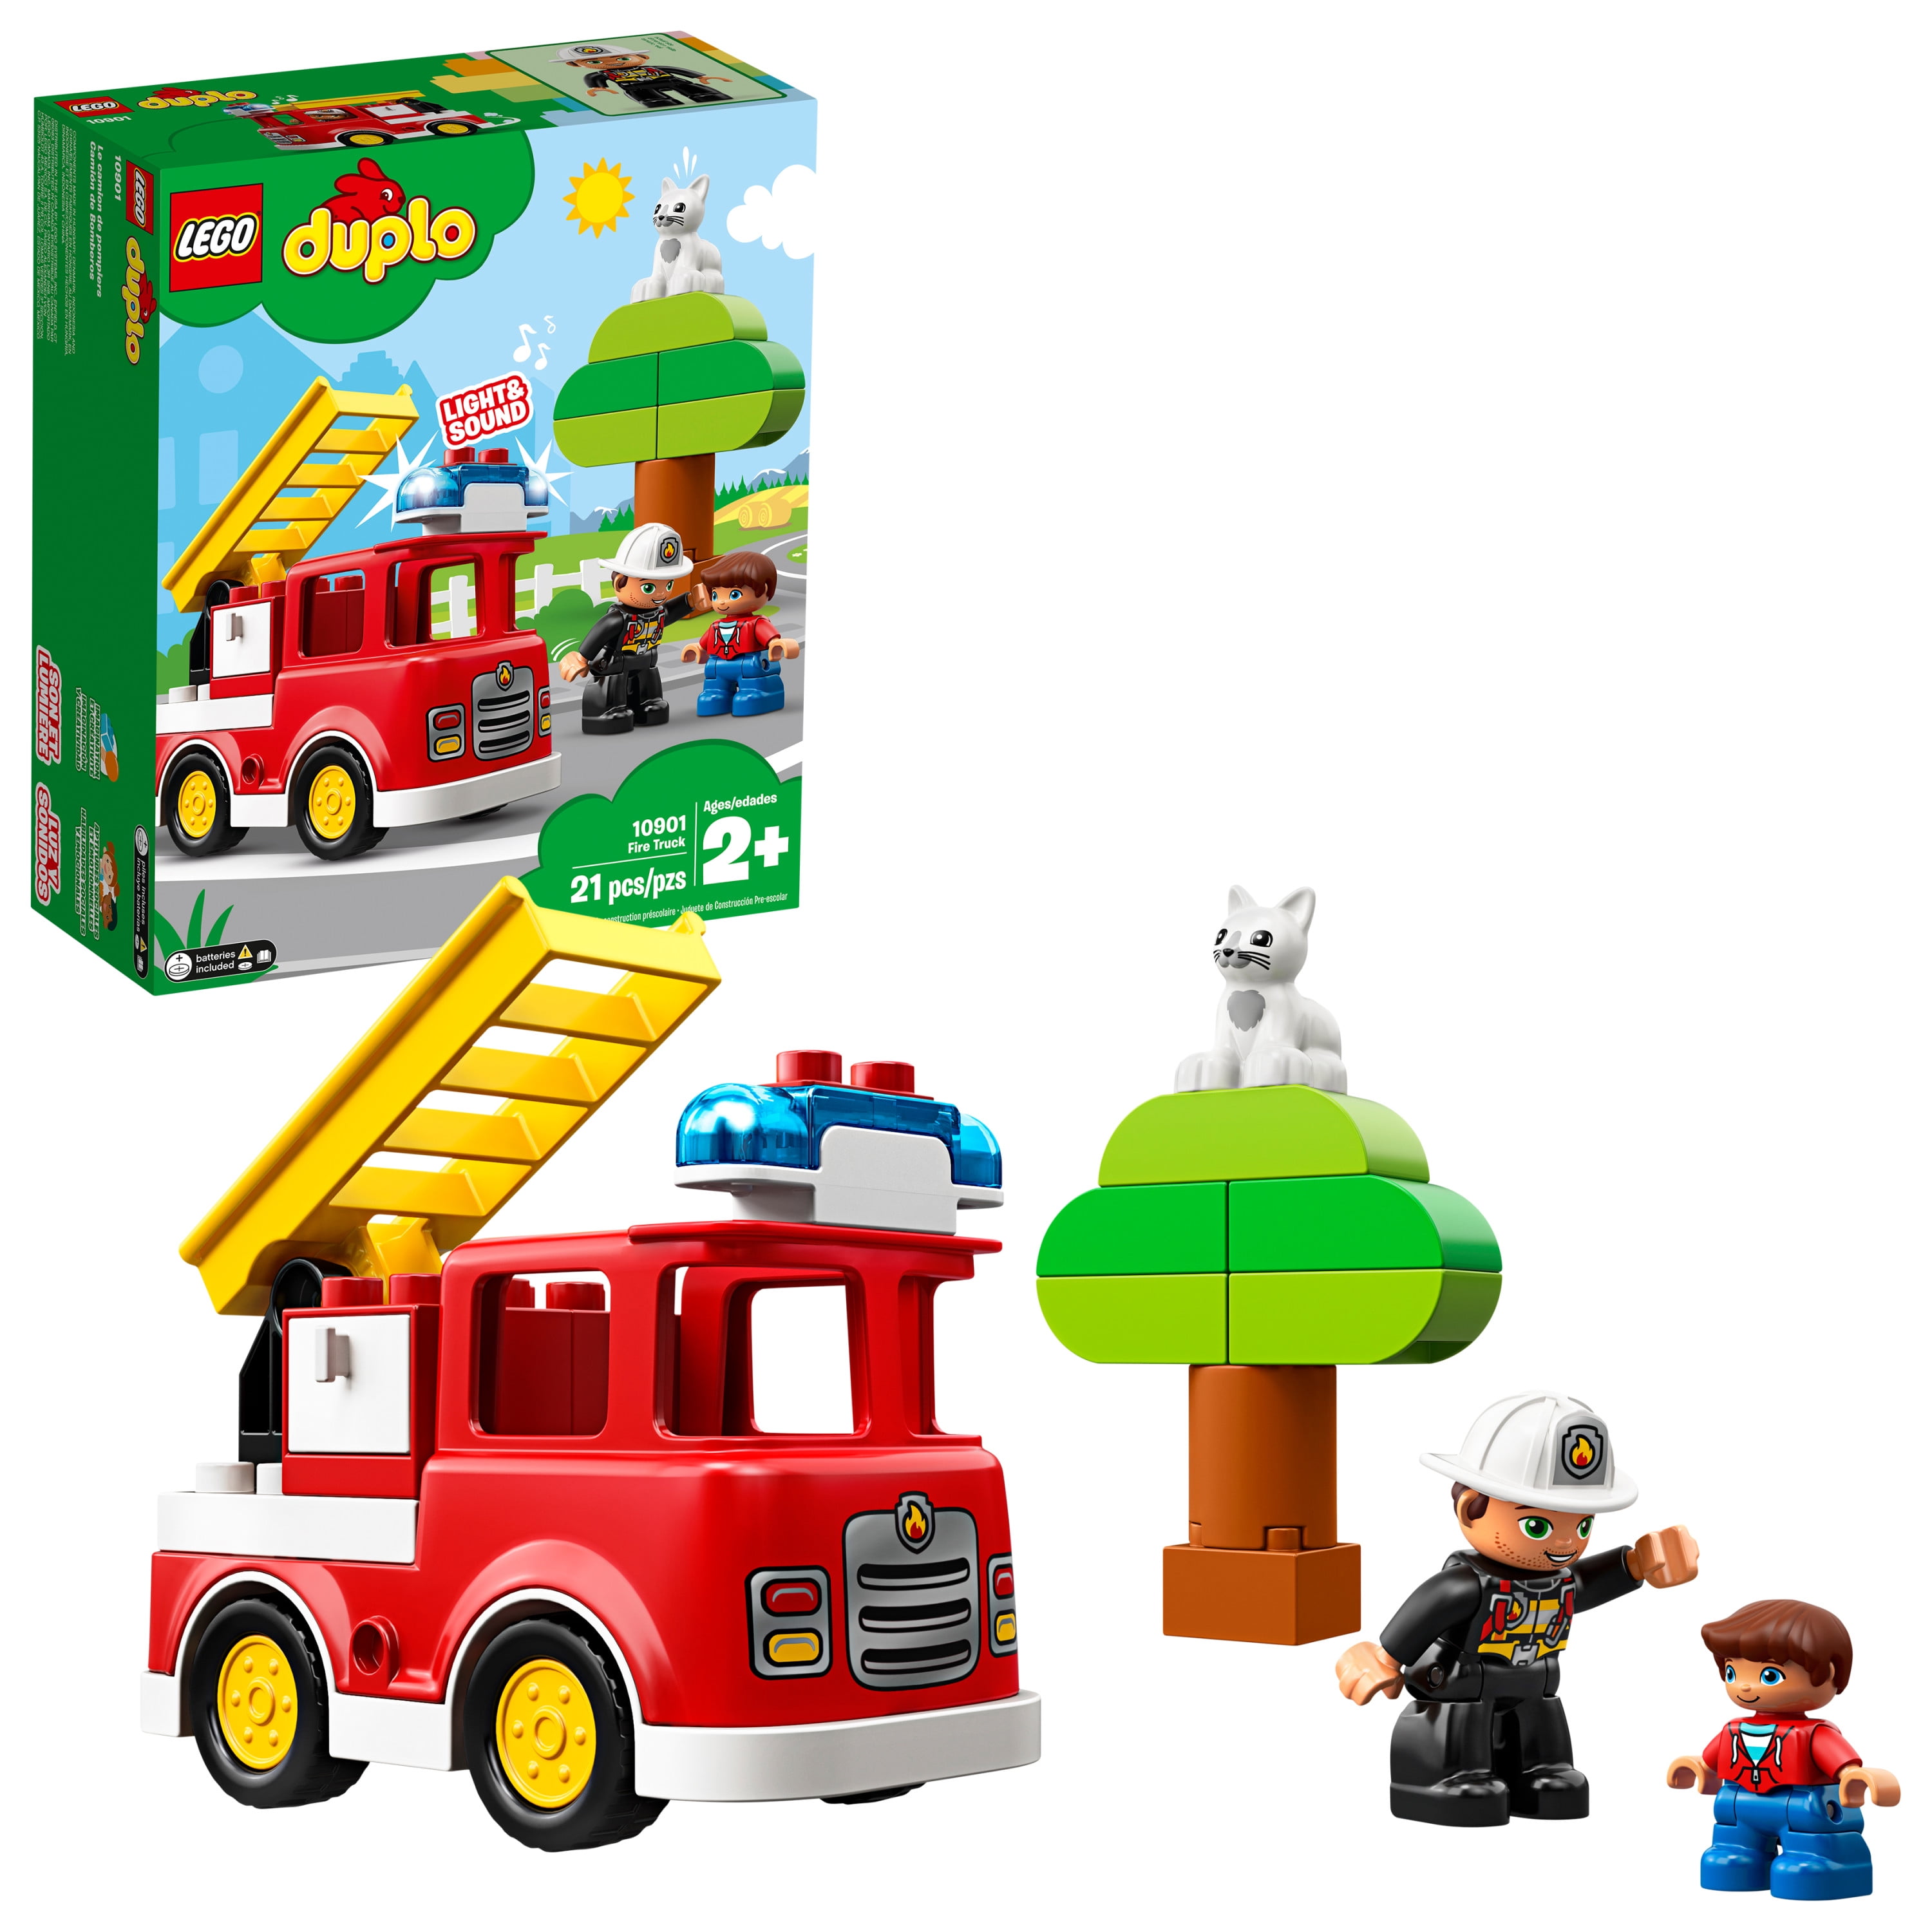 Brick by Brick Police Fire Fighters Pony Stables Space Heroes Play Set New 